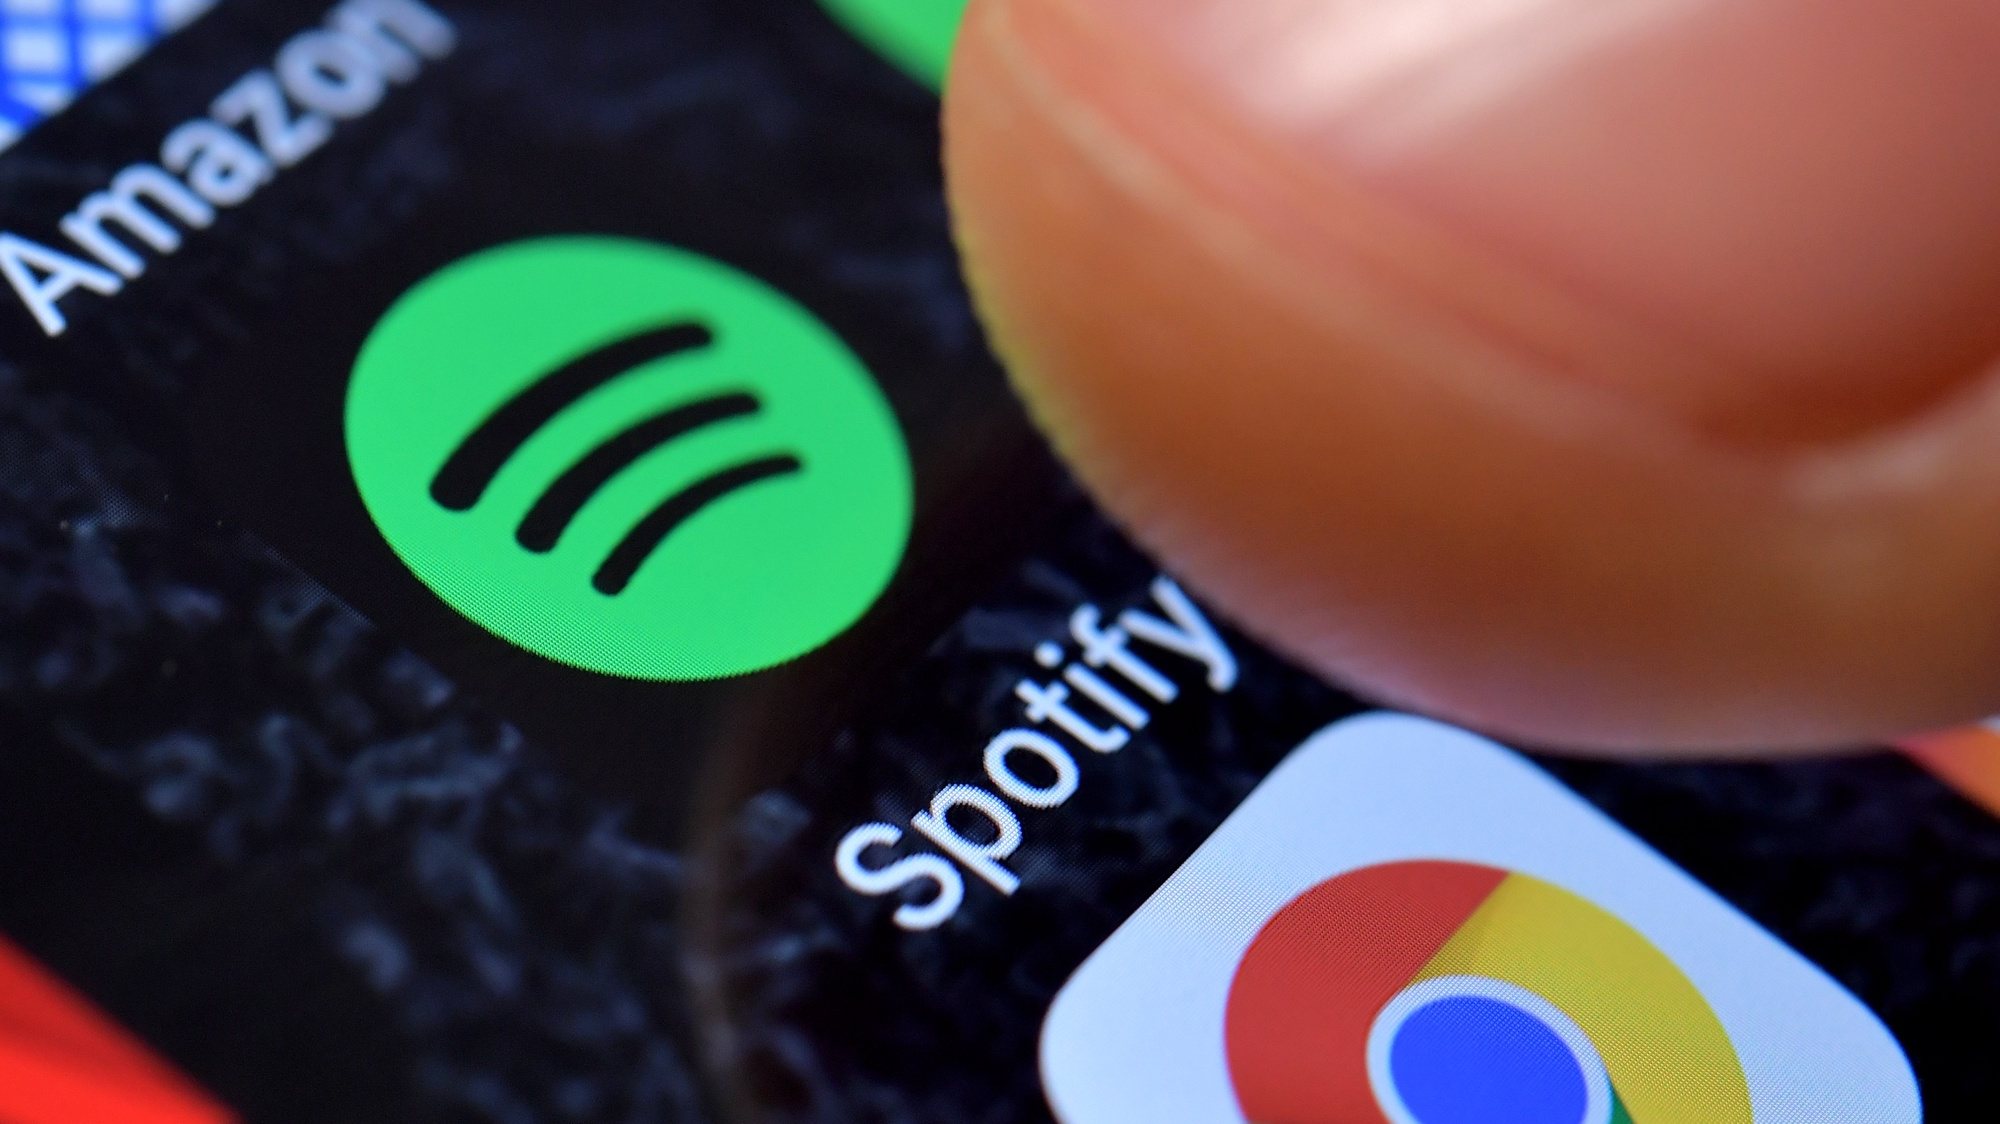 epa09044615 (FILE) - A close-up image showing the Spotify Music app on an iPhone in Kaarst, Germany, 08 November 2017 (reissued 01 March 2021). Spotify confirmed on 01 March 2021 it had removed hundreds of K-Pop releases from its worldwide streaming services over licensing disputes with South Korean distributor Kakao M.  EPA/SASCHA STEINBACH *** Local Caption *** 56665503